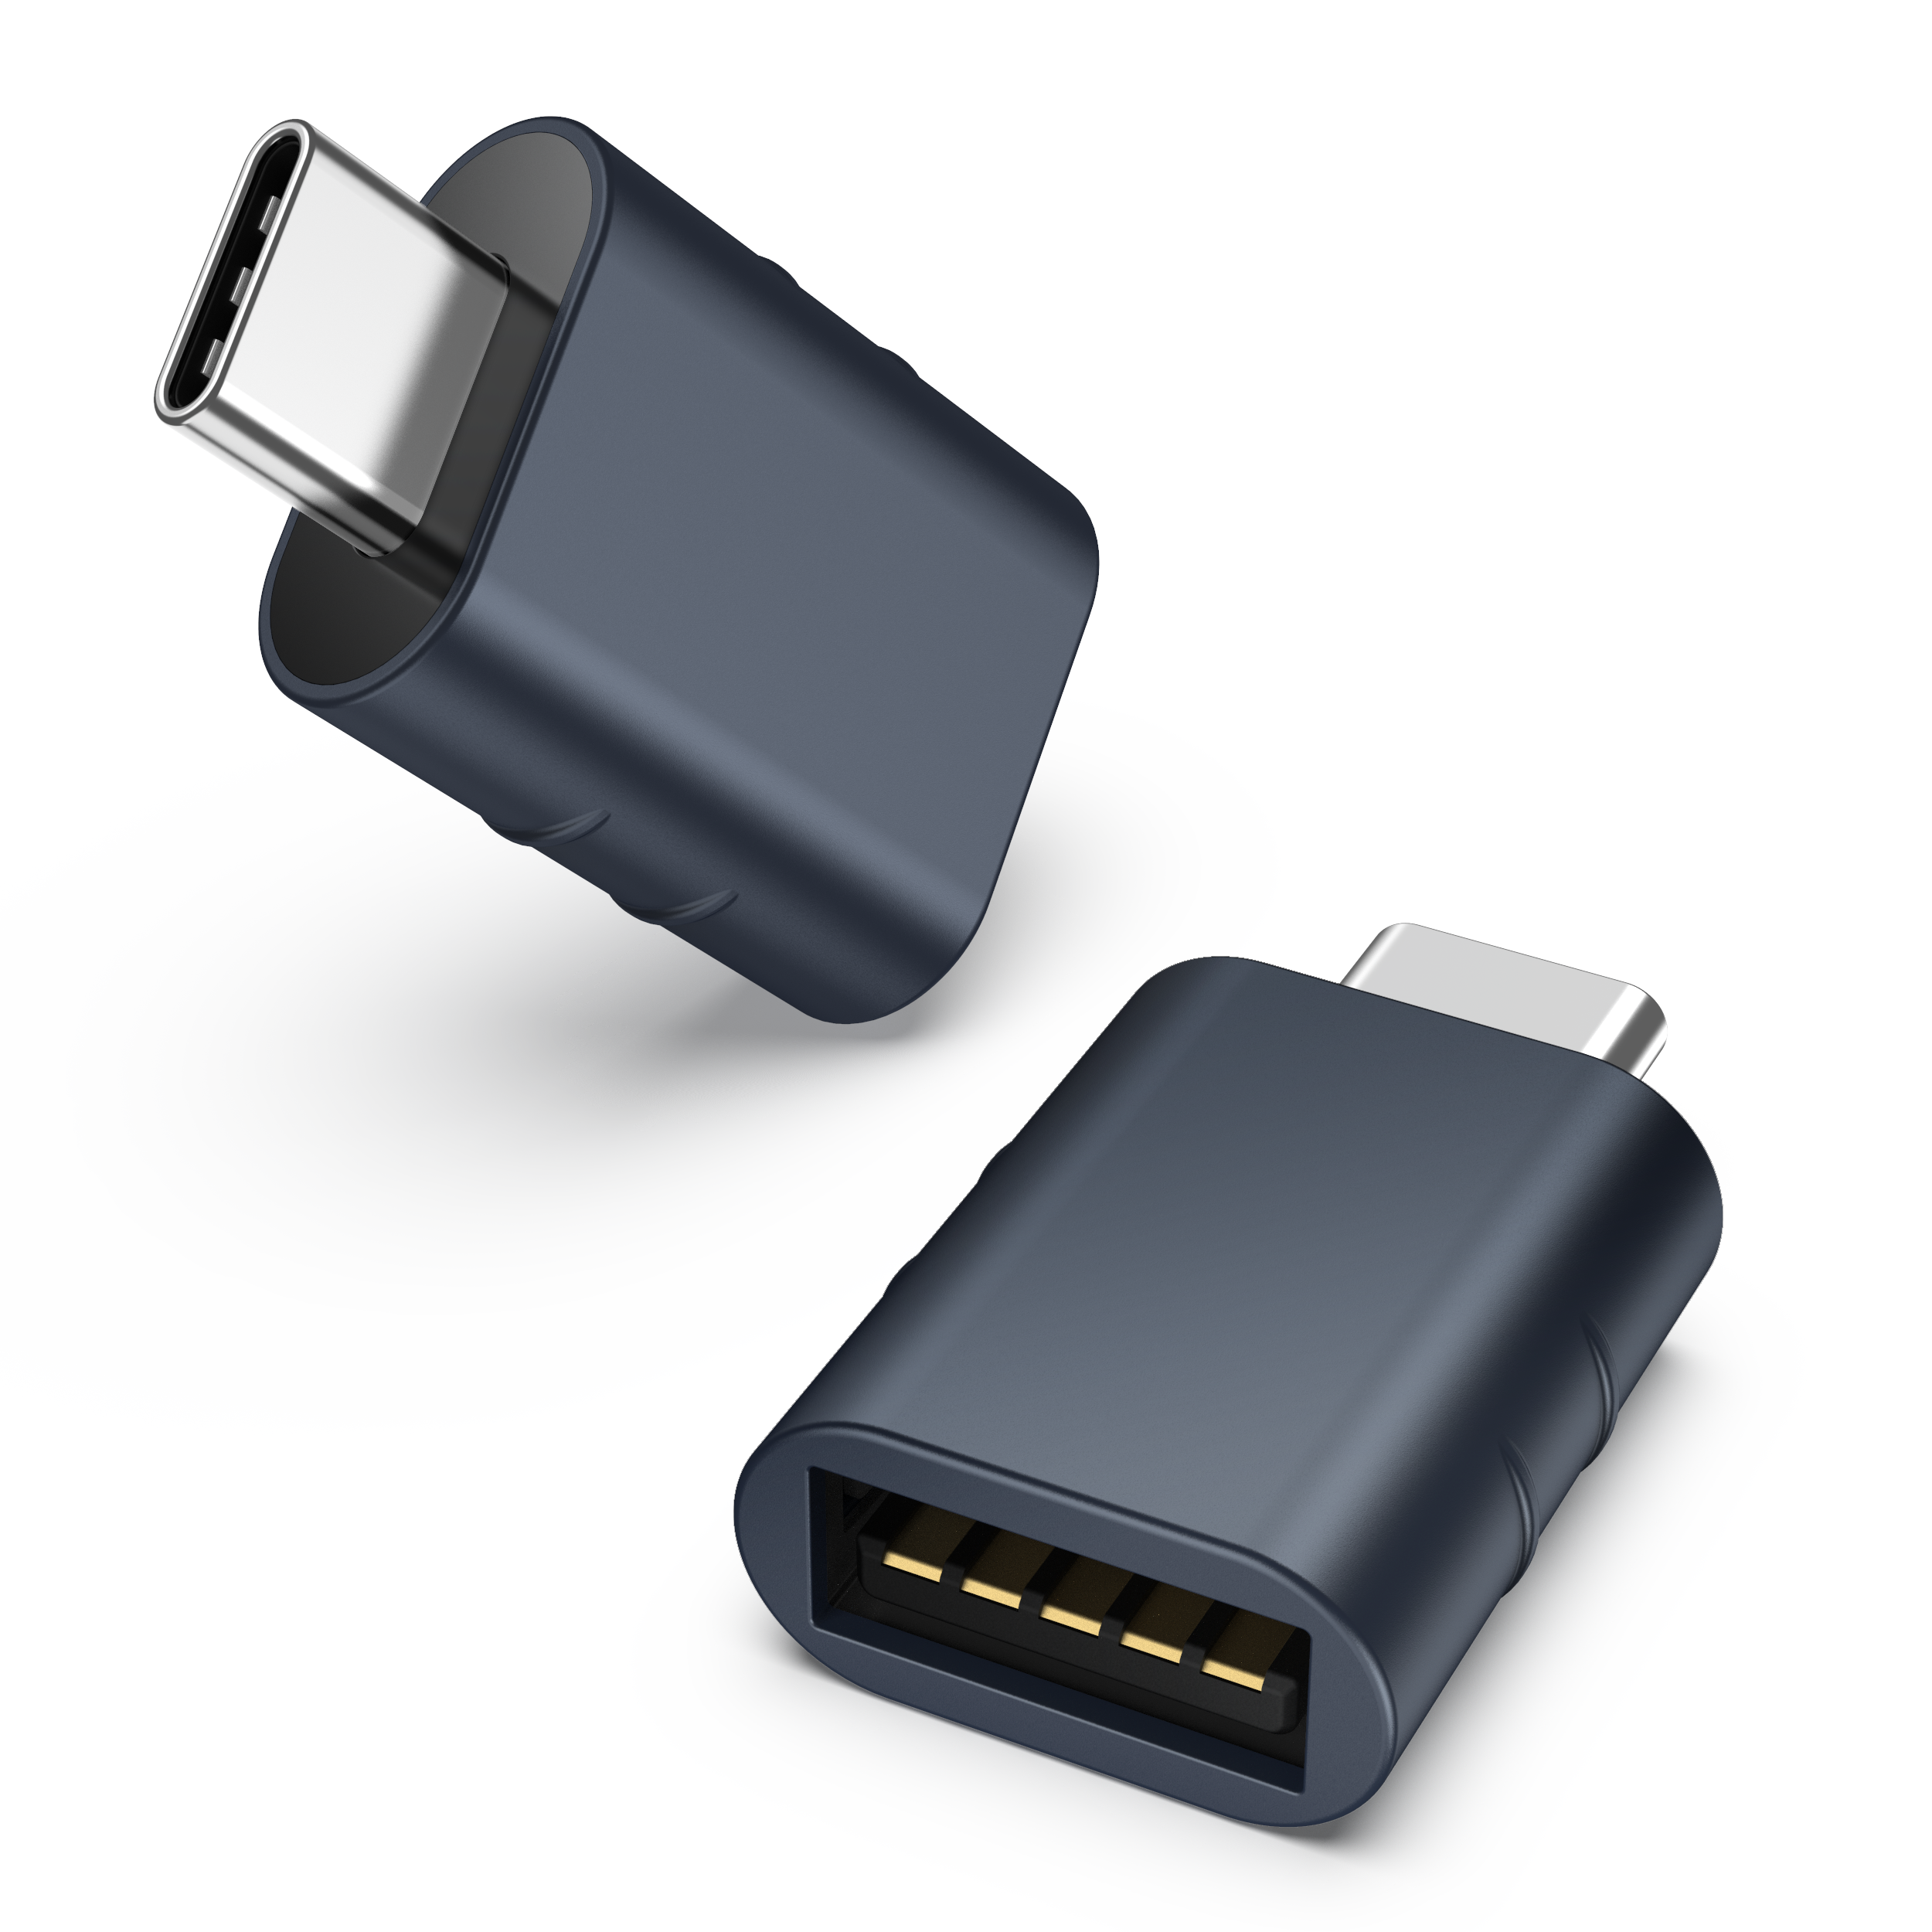 USB C to USB Adapters 3.0 (2 PACK) 10-in-1 Bundle